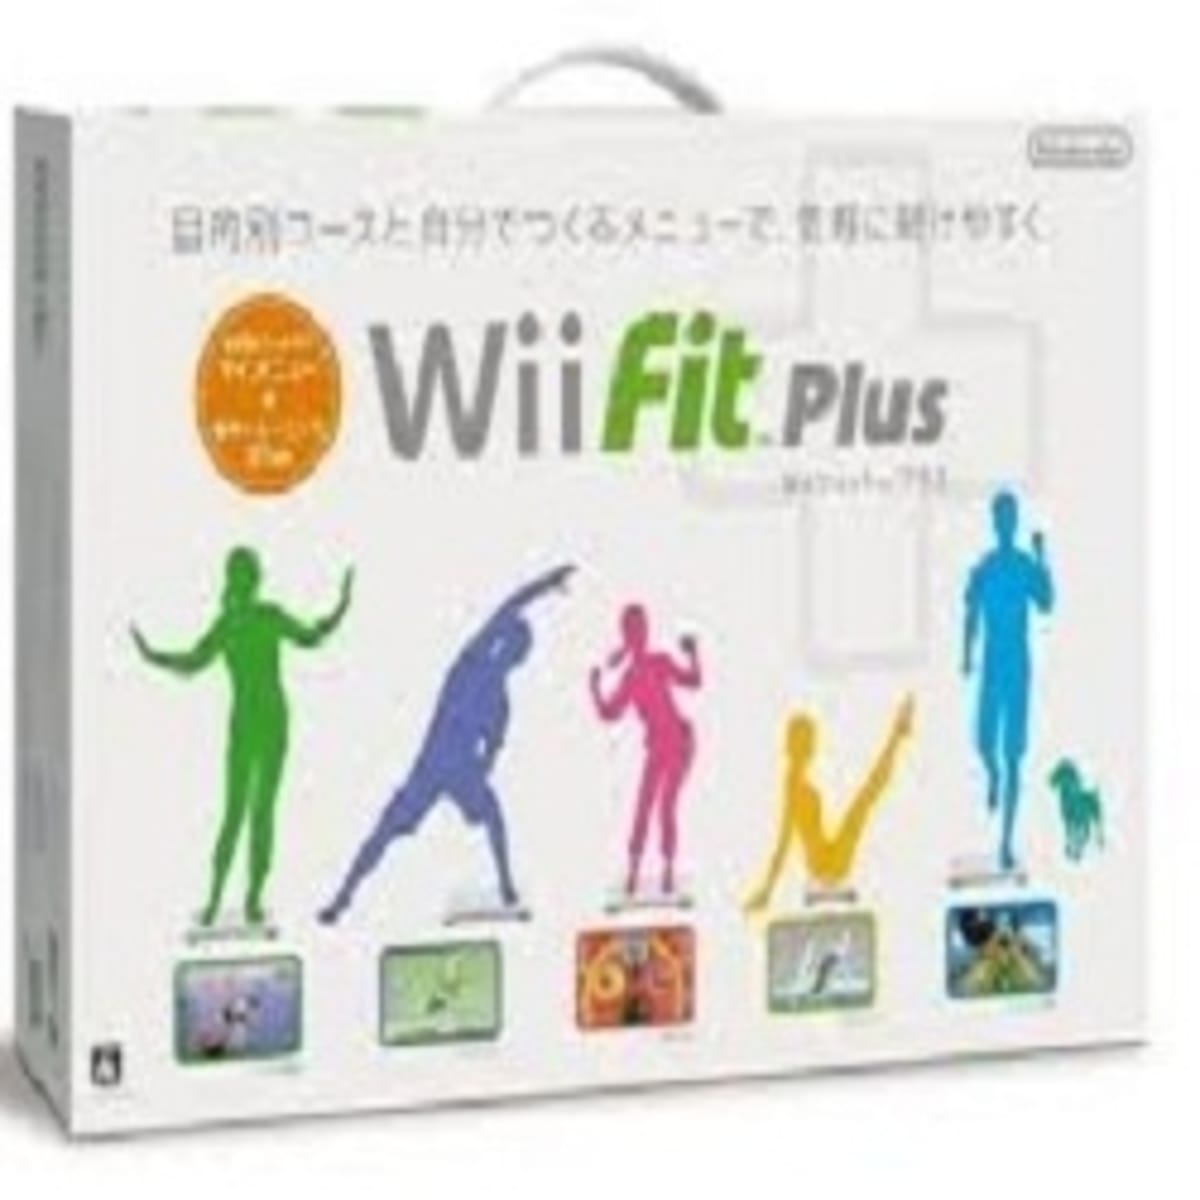 Wii Fit Users' Guide - GameSpot